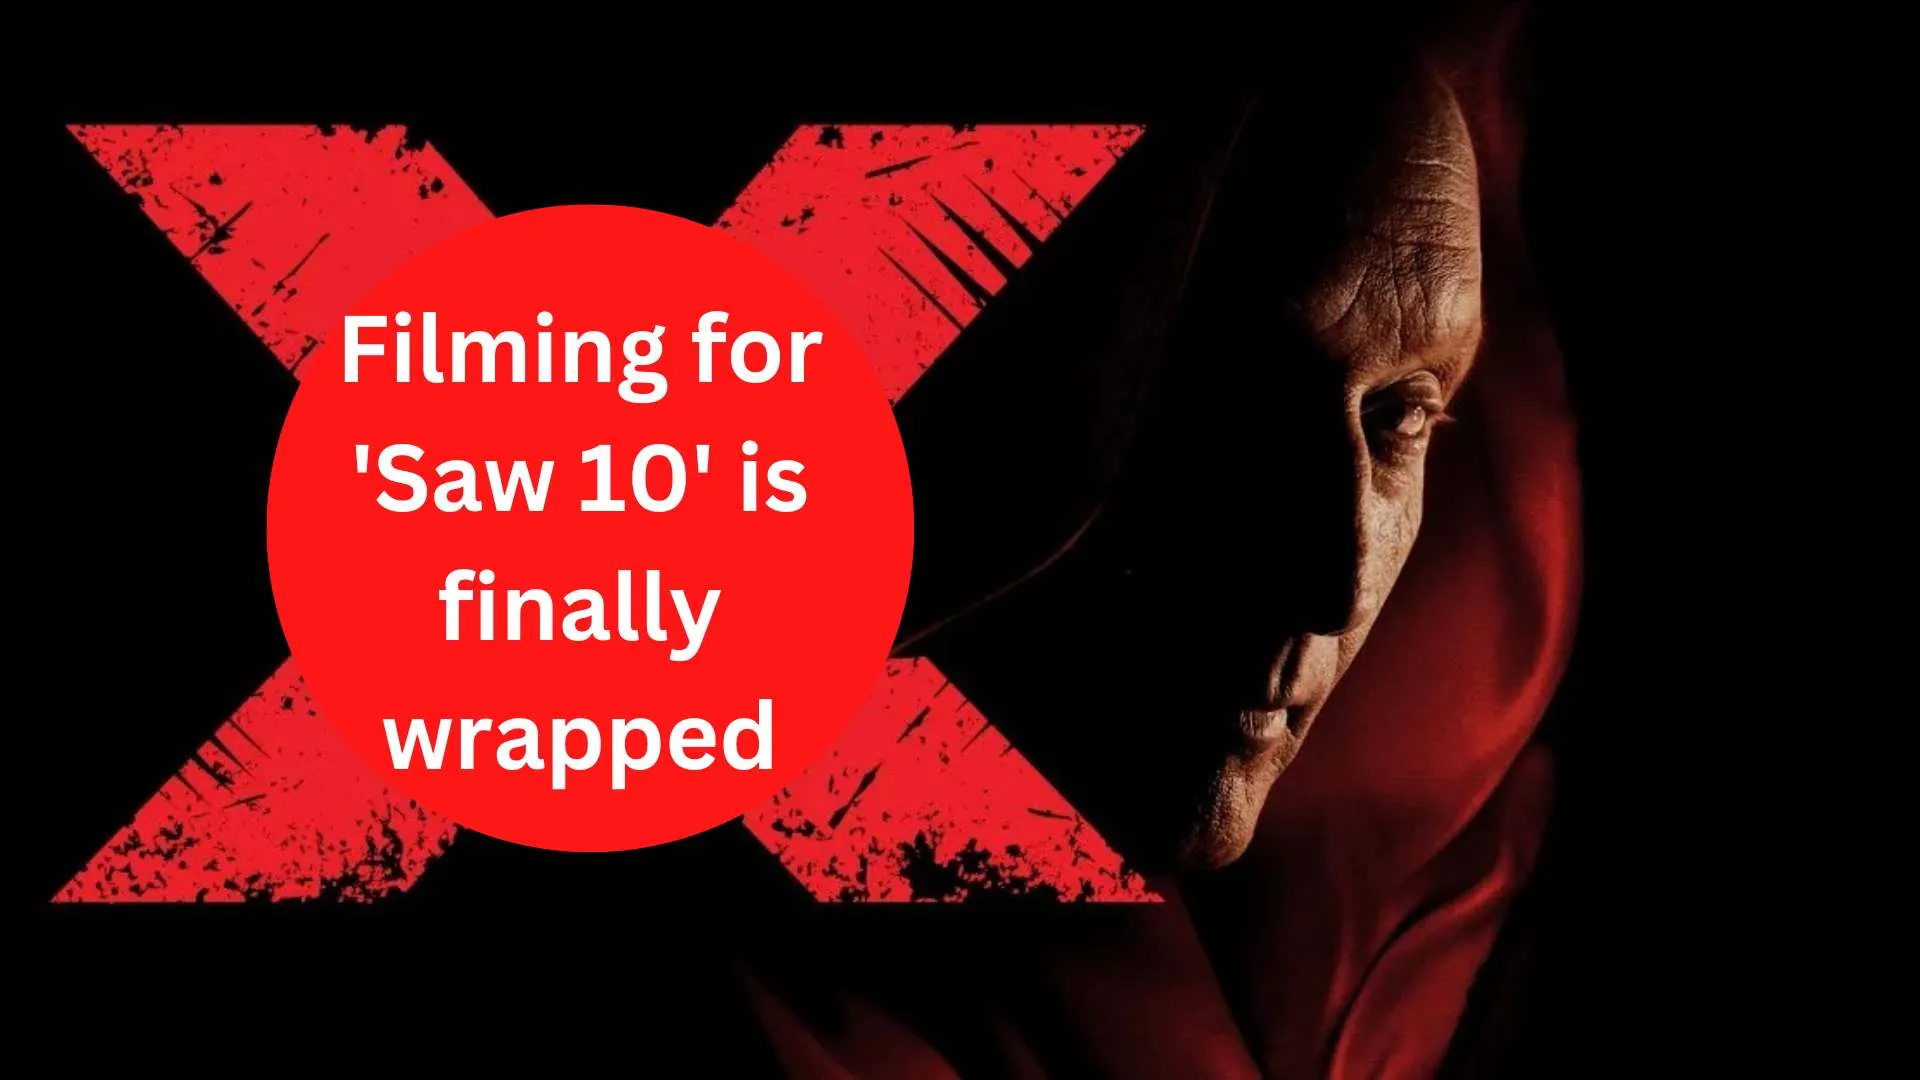 Filming for 'Saw 10' is finally wrapped